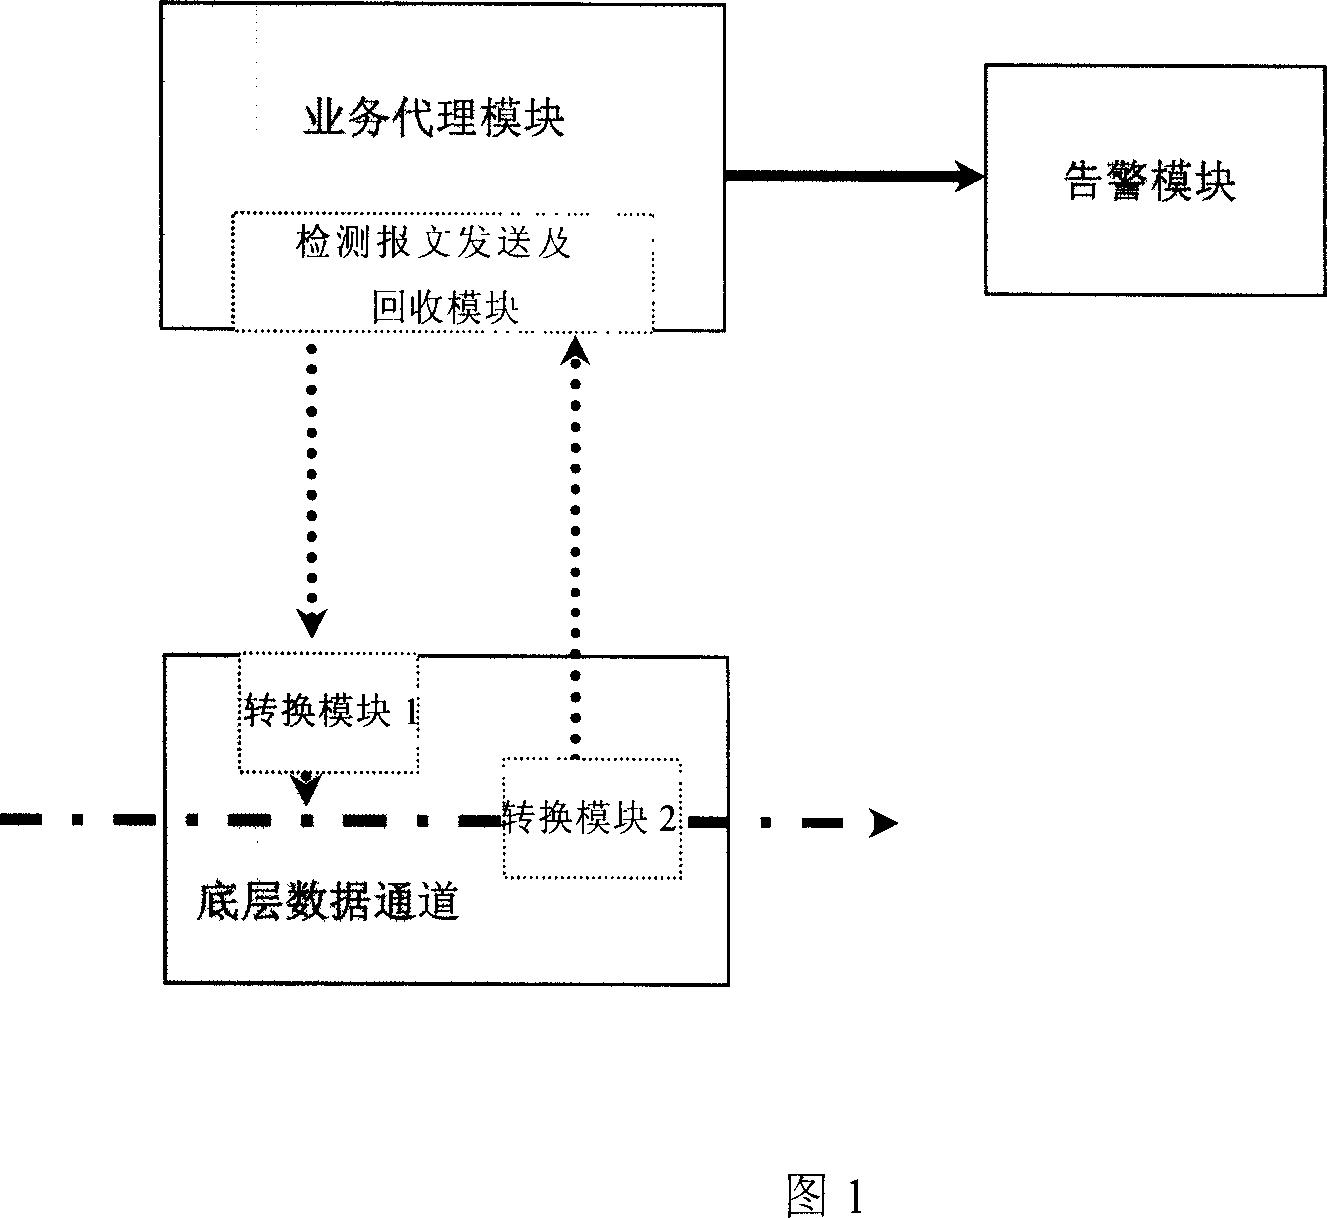 A system and method for real time detection of the data channel states